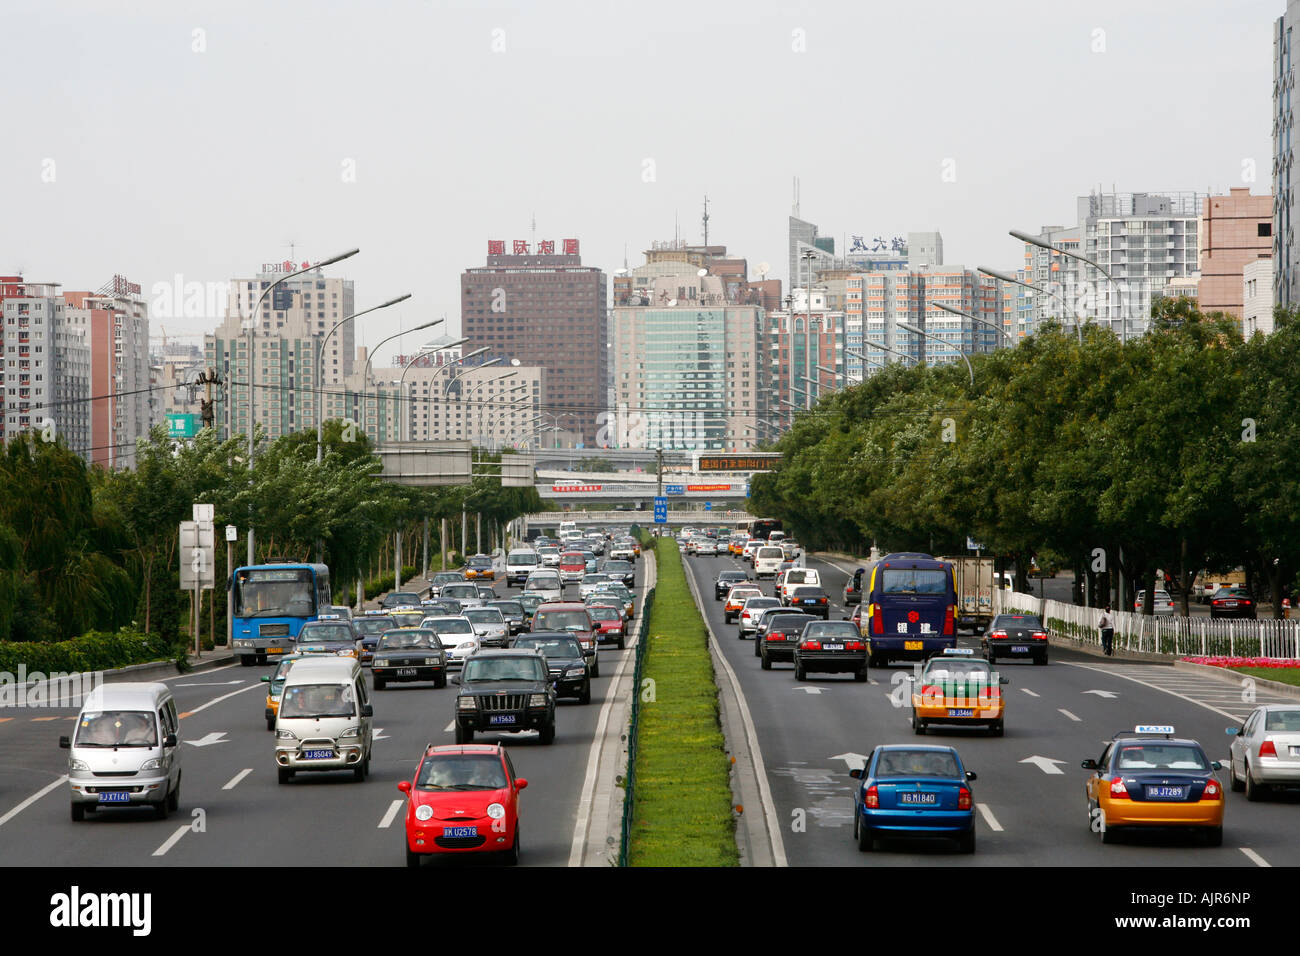 View of traffic on a city road Beijing China Stock Photo